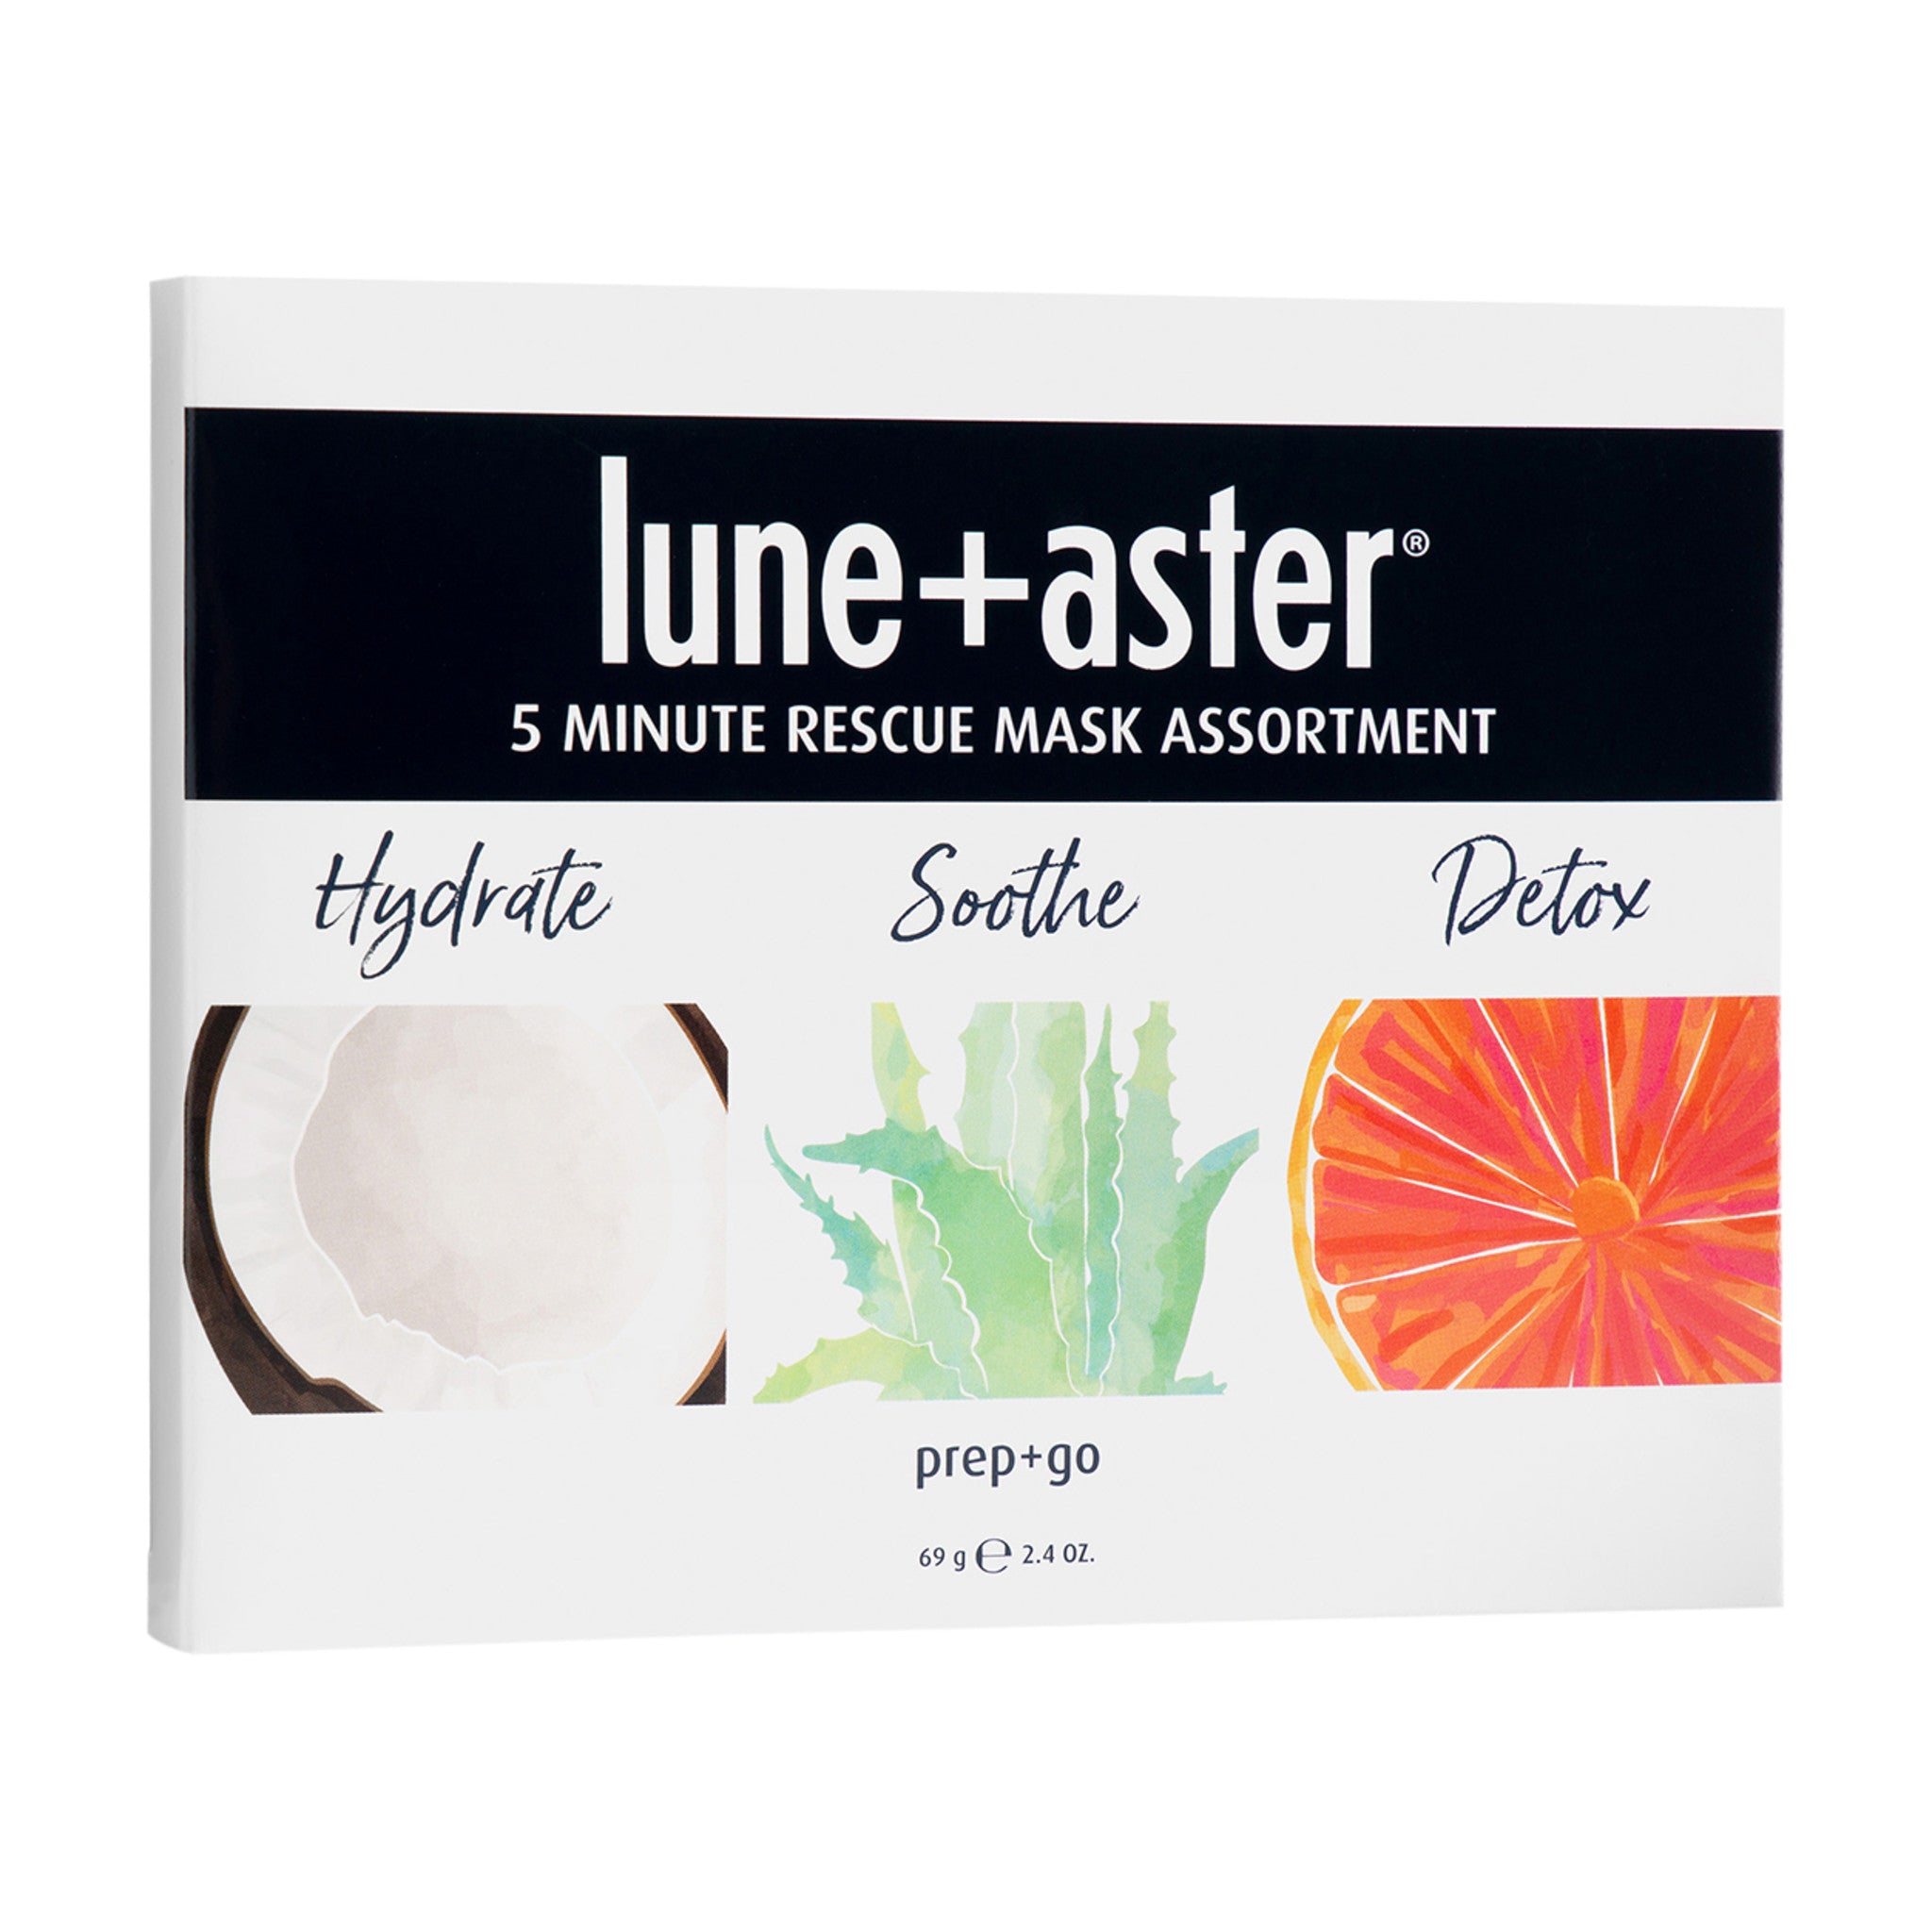 Lune+Aster 5 Minute Rescue Mask Assortment Trio Hydrate, Soothe and Detox main image.